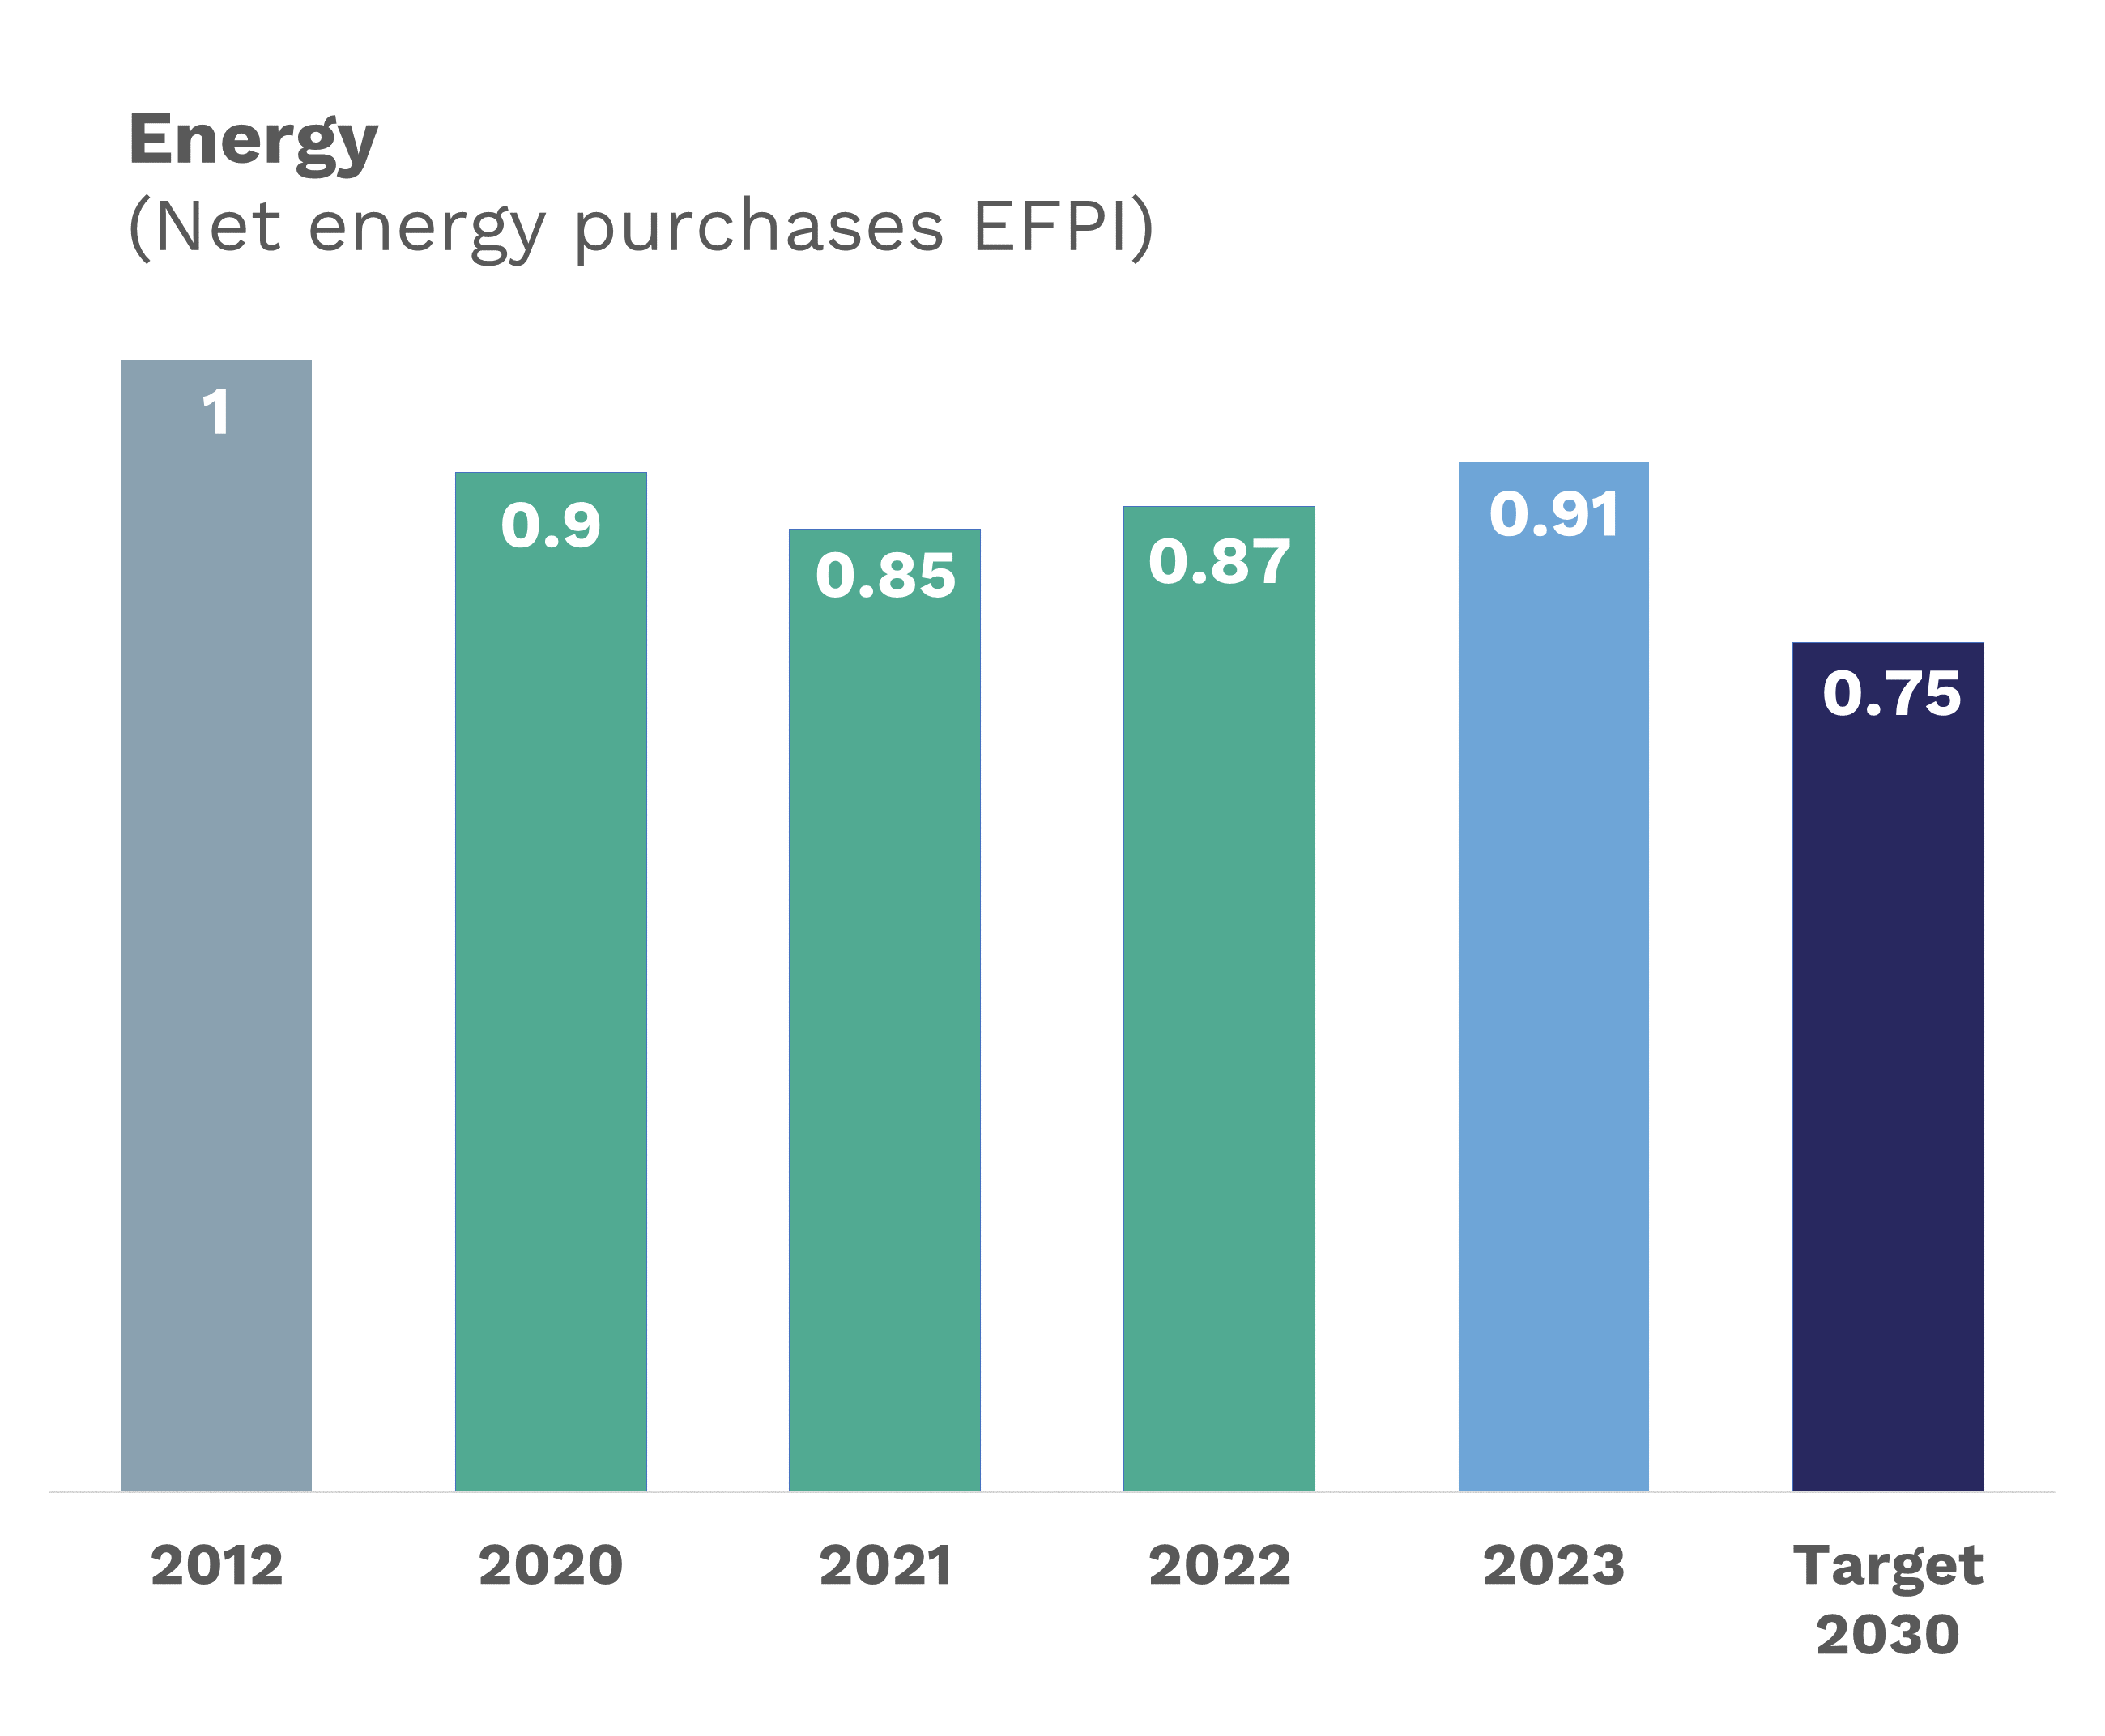 In 2012, the EFPI for net energy purchase was 1 ; 0.88 in 2018 ; 0.91 in 2019 ; 0.90 in 2020 ; 0.85 in 2021 ; and a goal of 0.75 in 2030